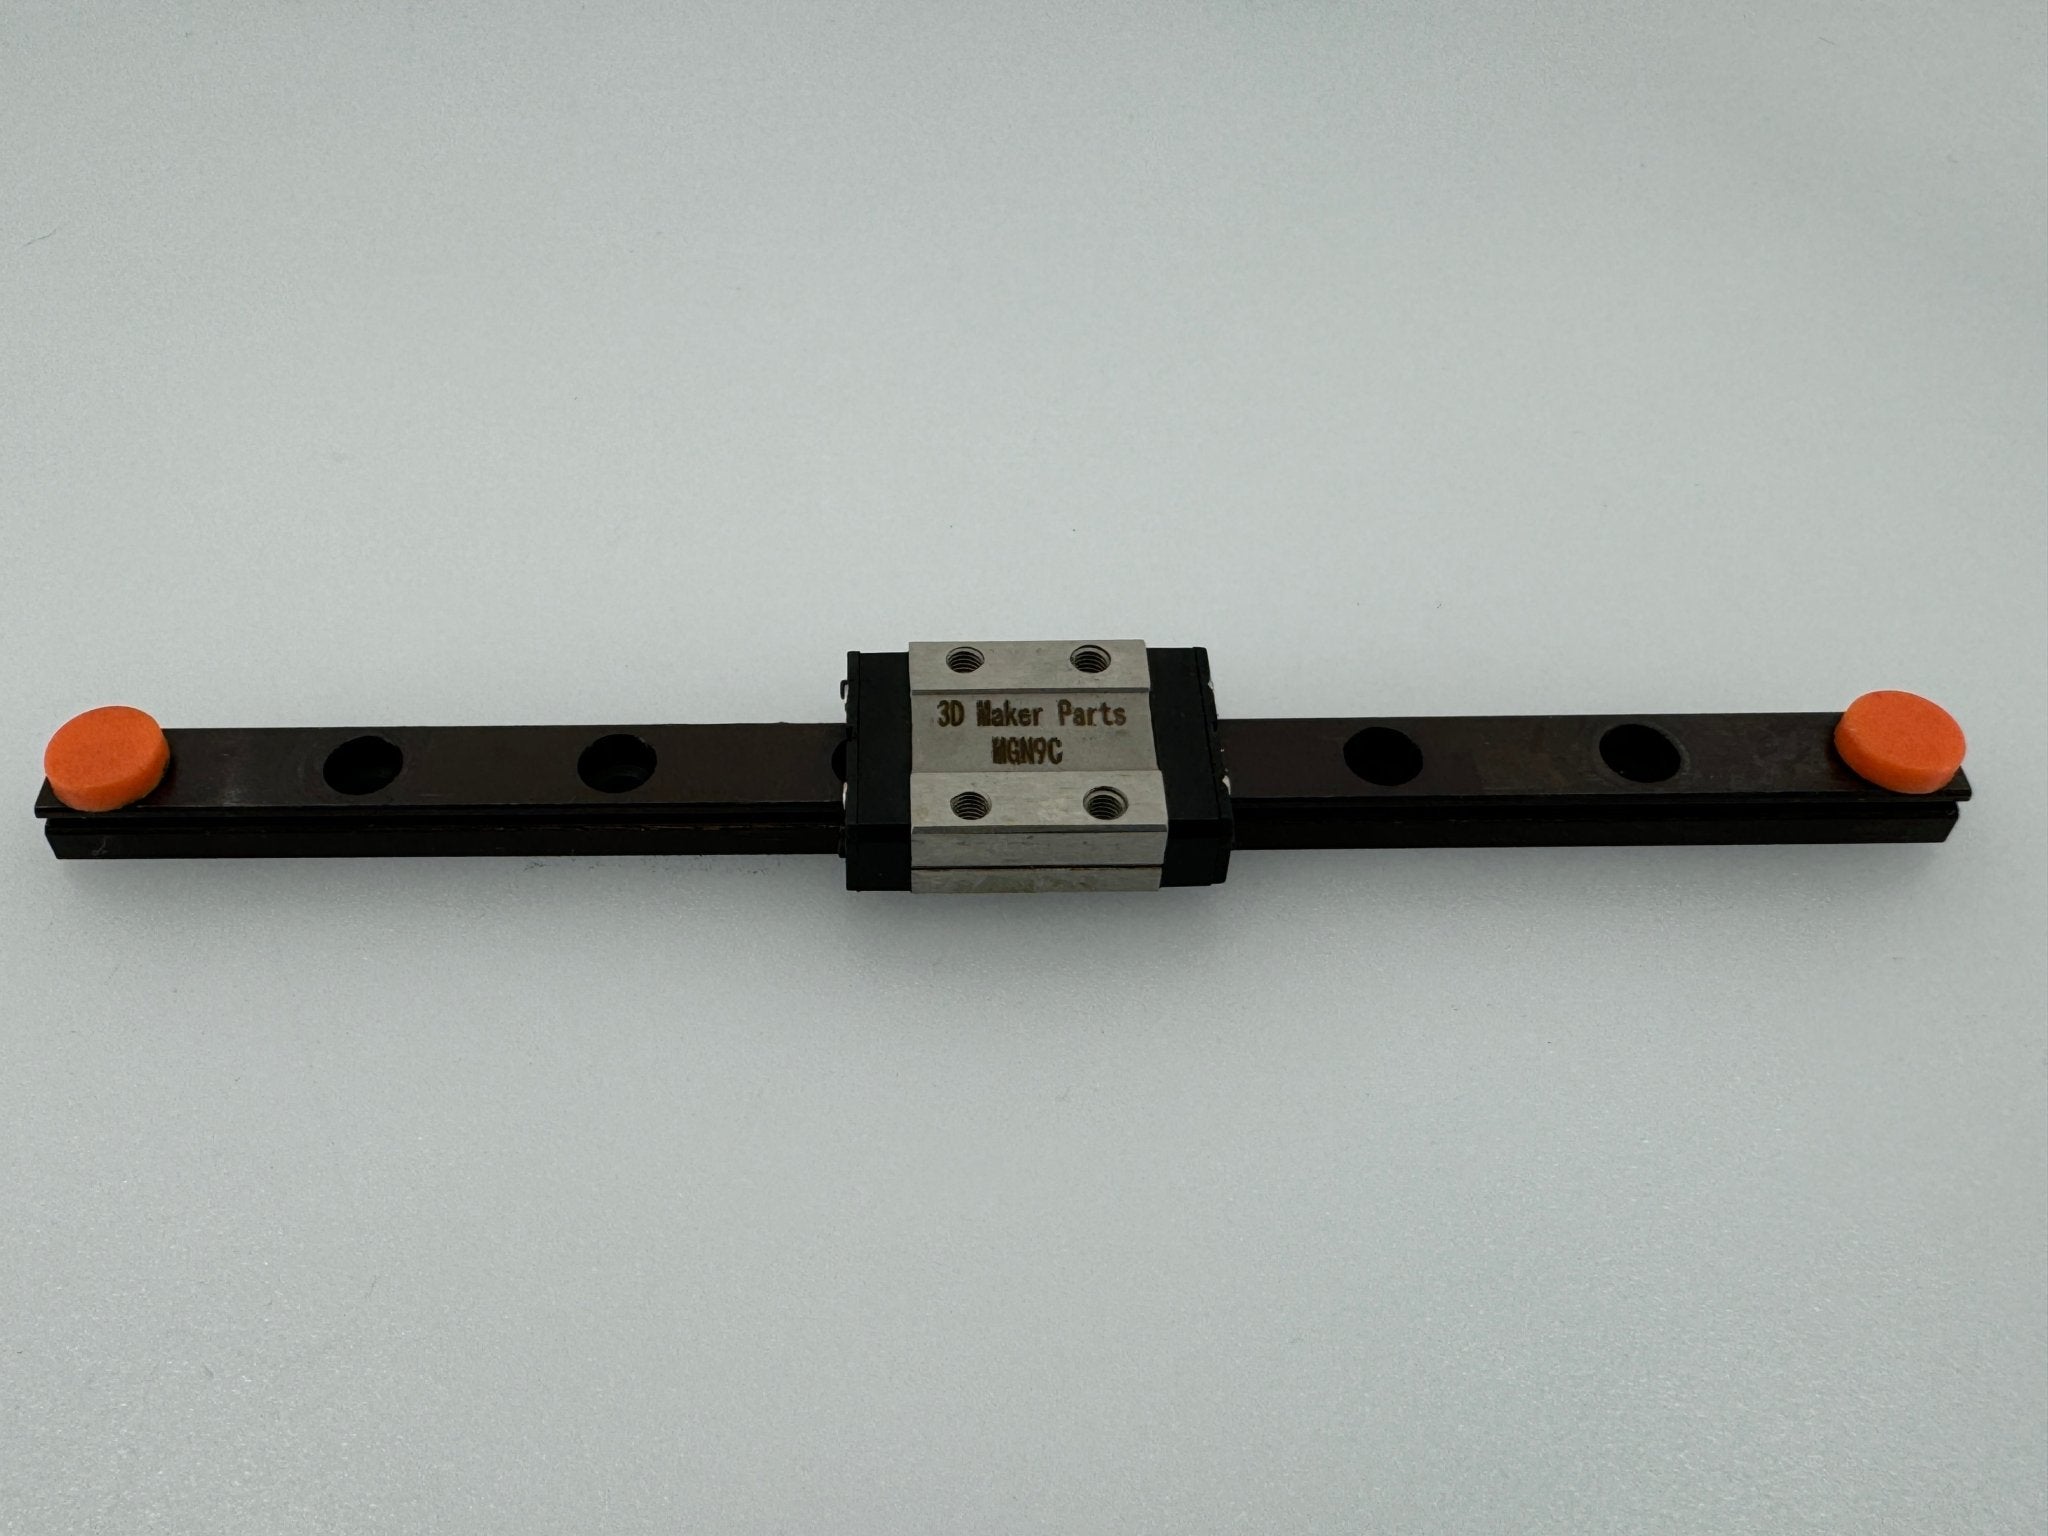 3D Maker Parts MGN9C-1R-150 Linear Rails with Carriages - West3D 3D Printing Supplies - 3DMakerParts